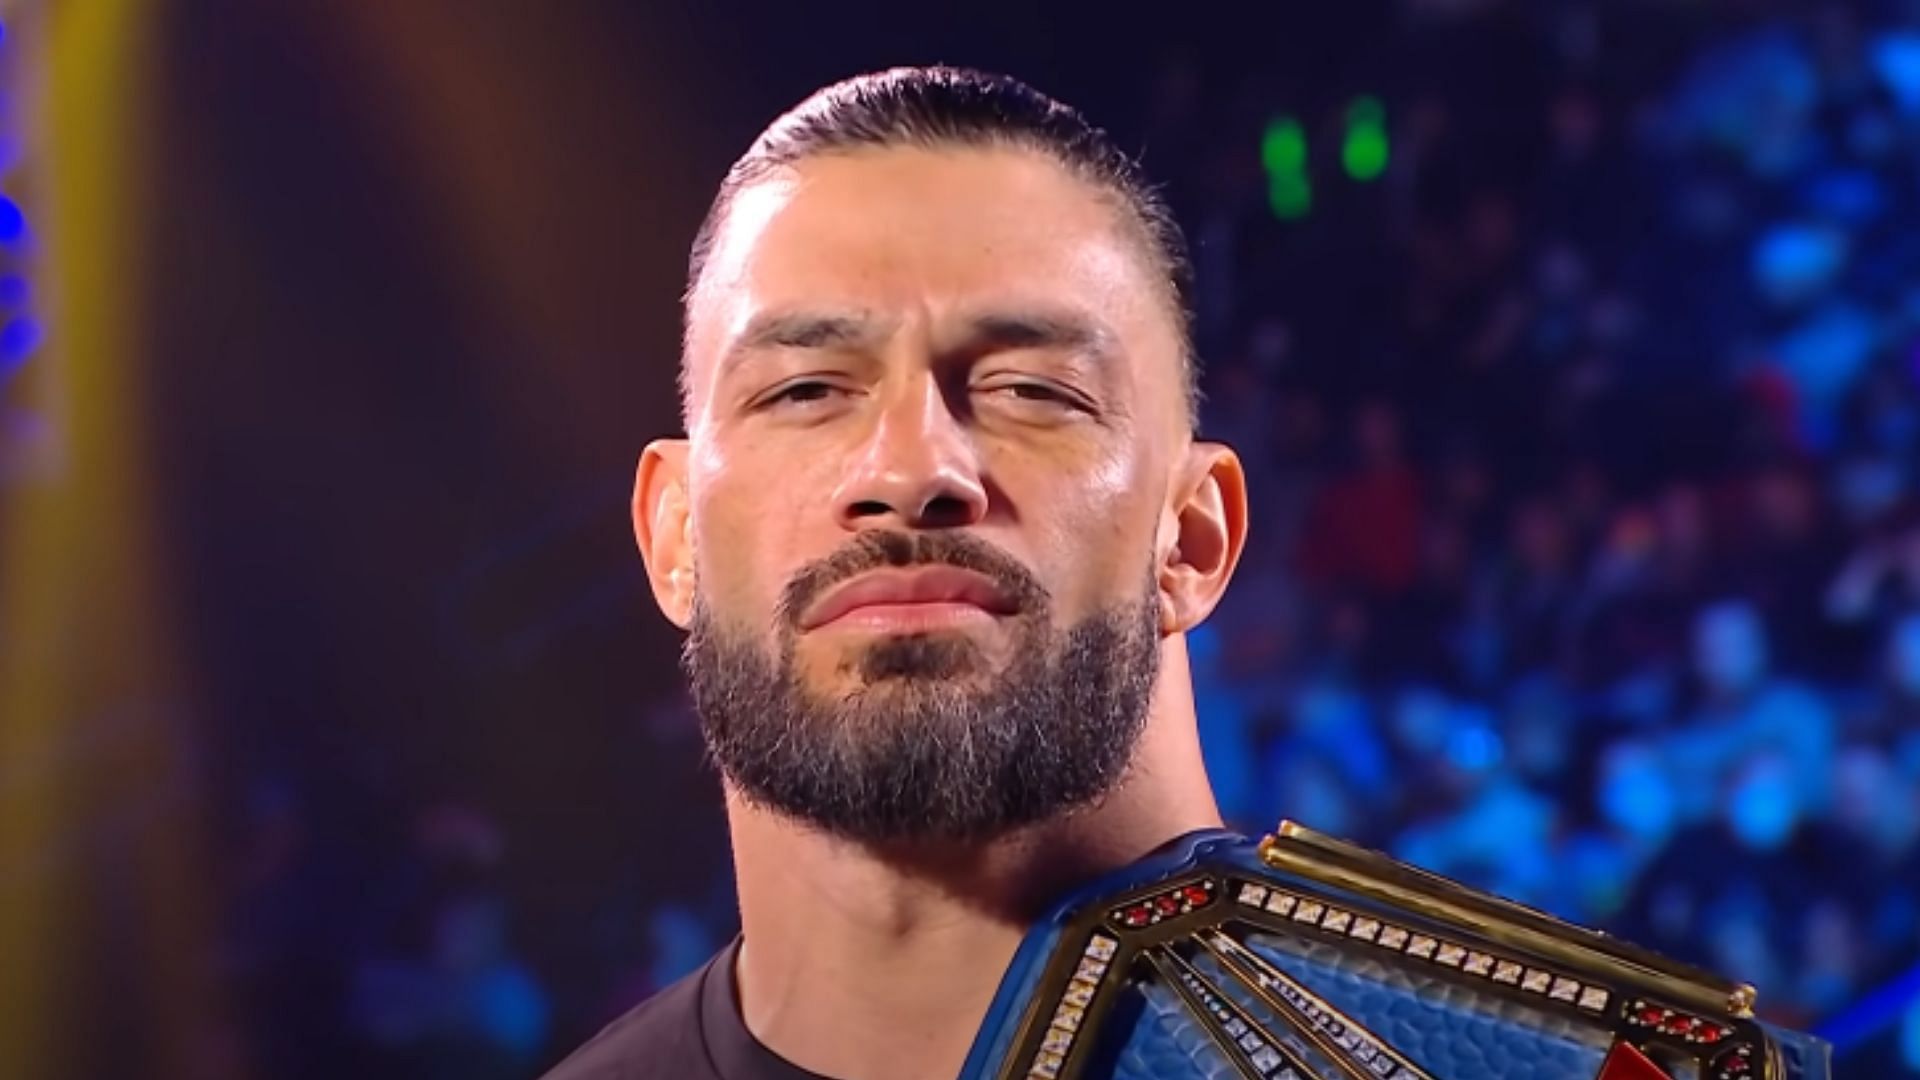 Roman Reigns is the current Universal Champion.